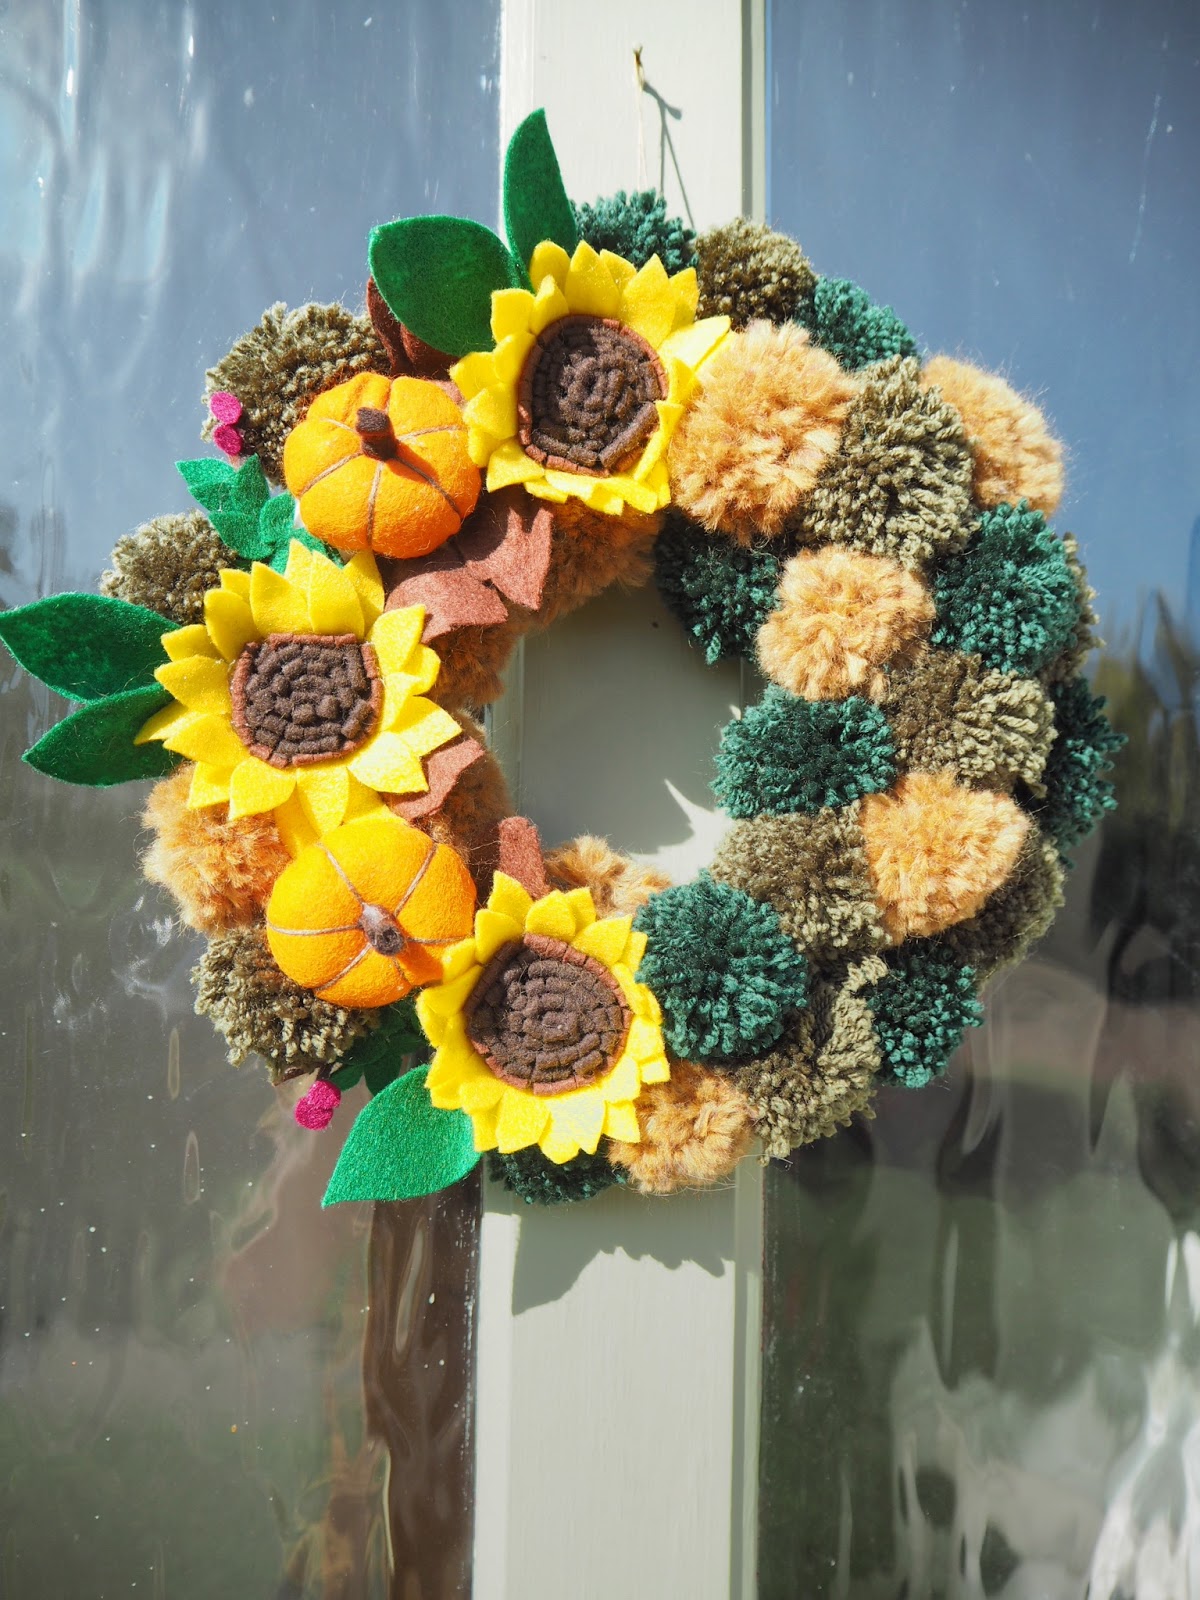 How to make an autumn wreath from felt flowers and woollen yarn pom poms. DIY tutorial for an easy, simple craft you can make yourself. Fall wreath perfect for your front door this season. 